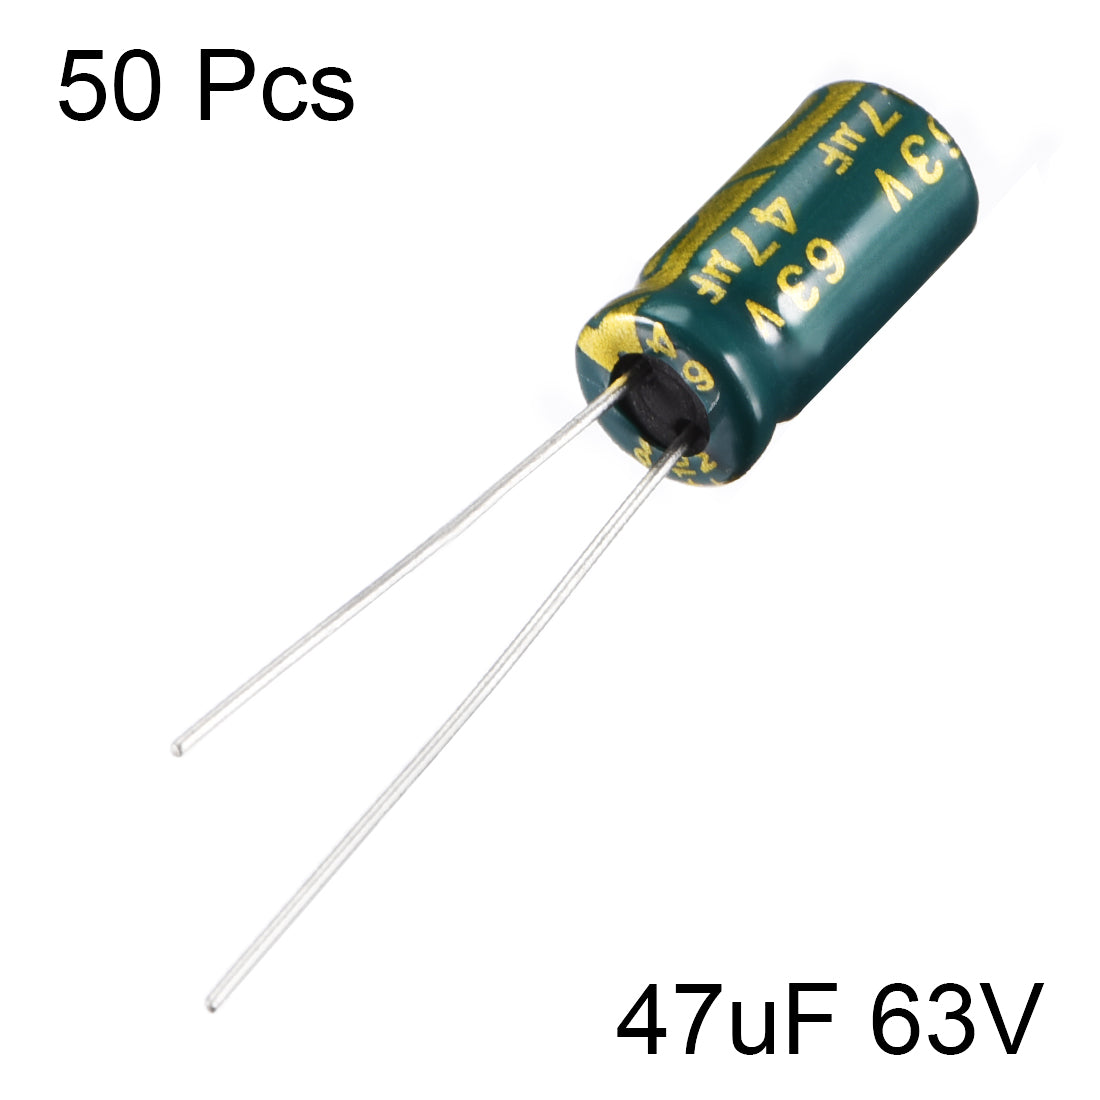 uxcell Uxcell Aluminum Radial Electrolytic Capacitor Low ESR Green with 47uF 63V 105 Celsius Life 3000H 6.3 x 12 mm High Ripple Current,Low Impedance 50pcs